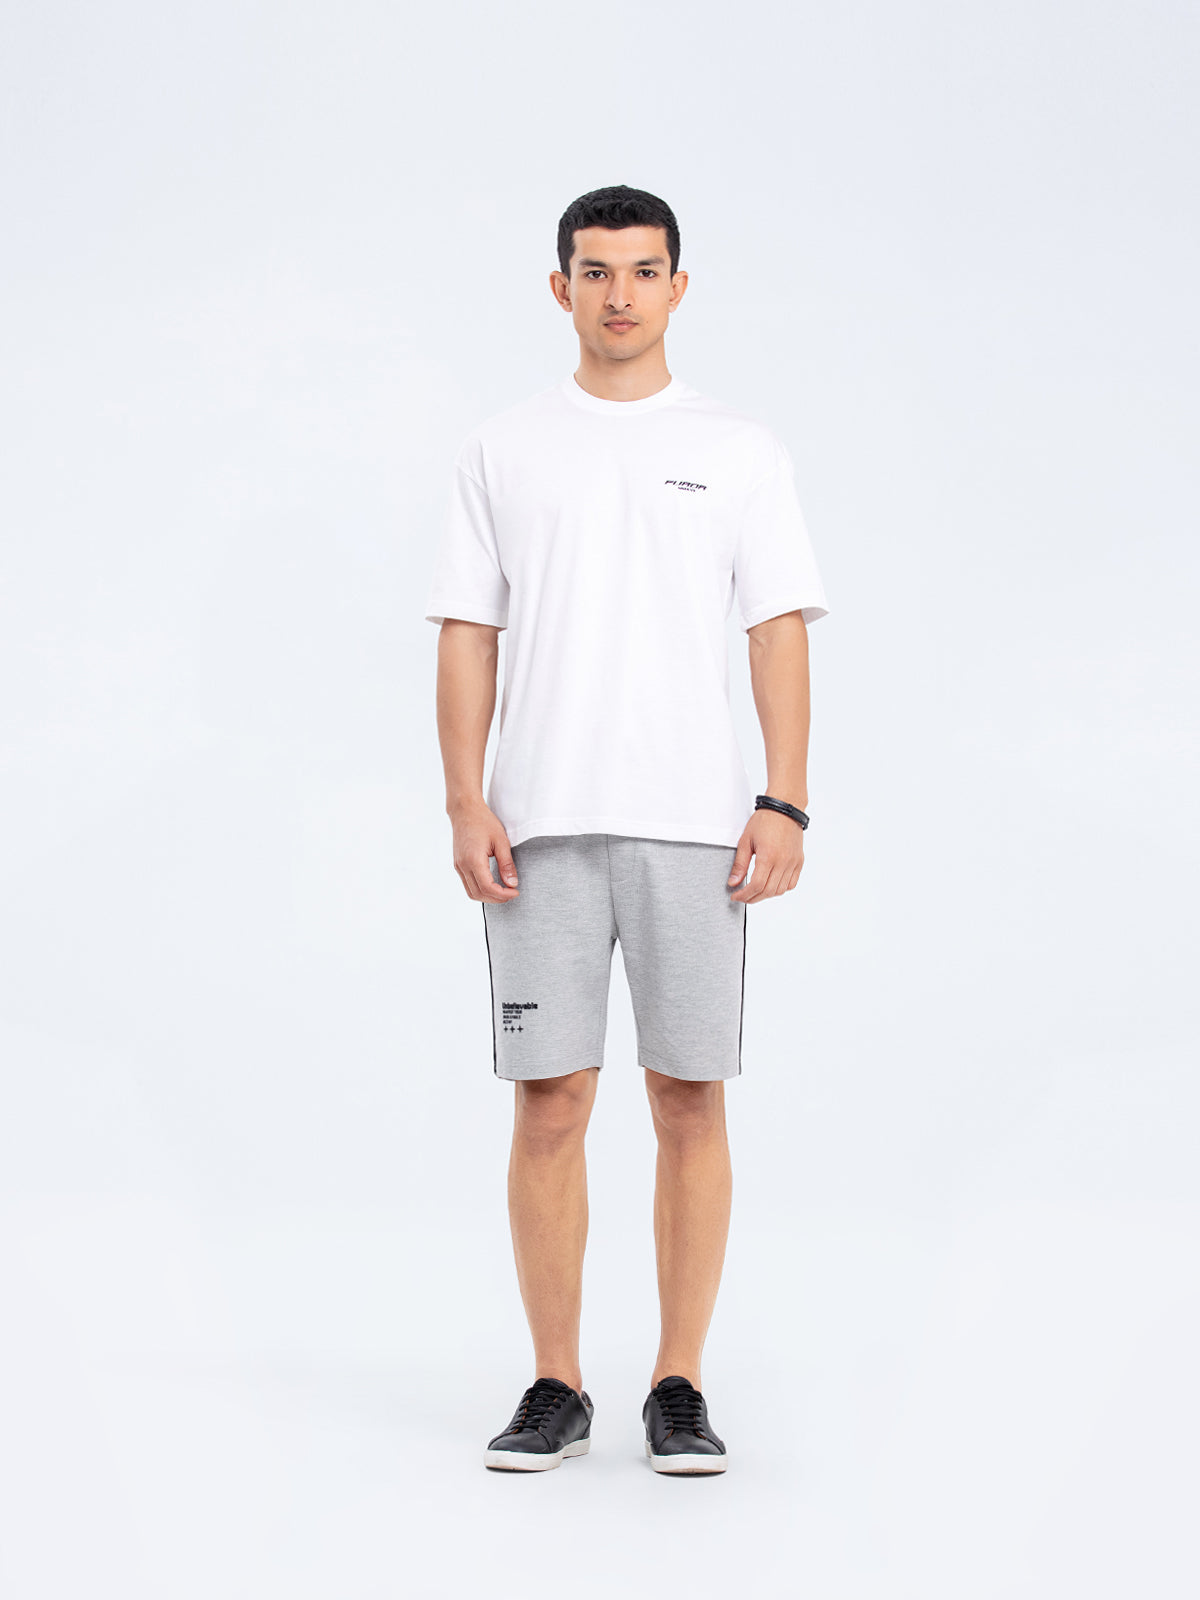 Relaxed Fit Graphic Tee - FMTGT24-041